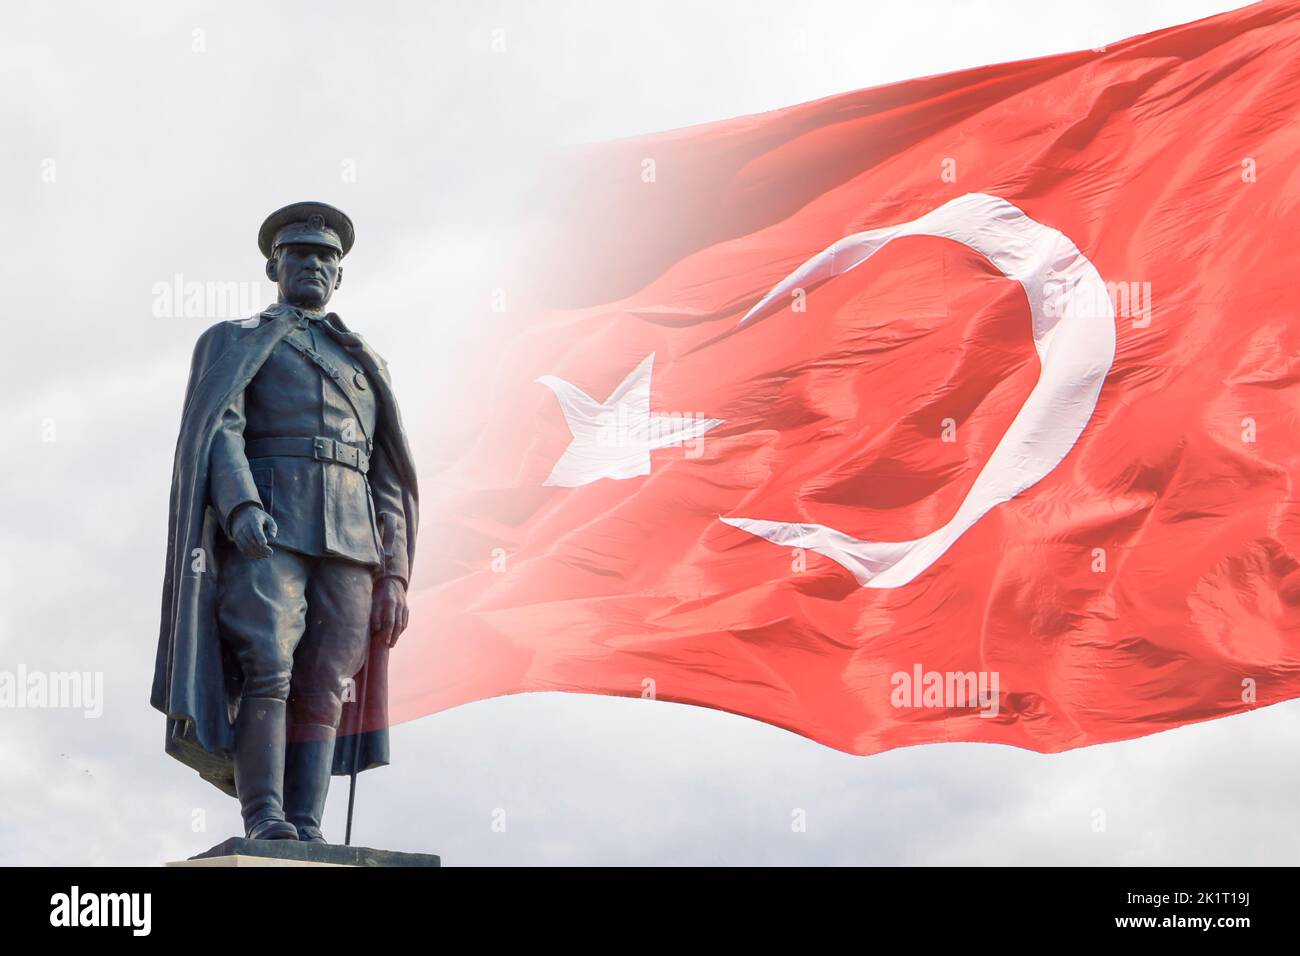 Ataturk monument and Turkish Flag. 29th october republic day of Turkey background photo. Stock Photo